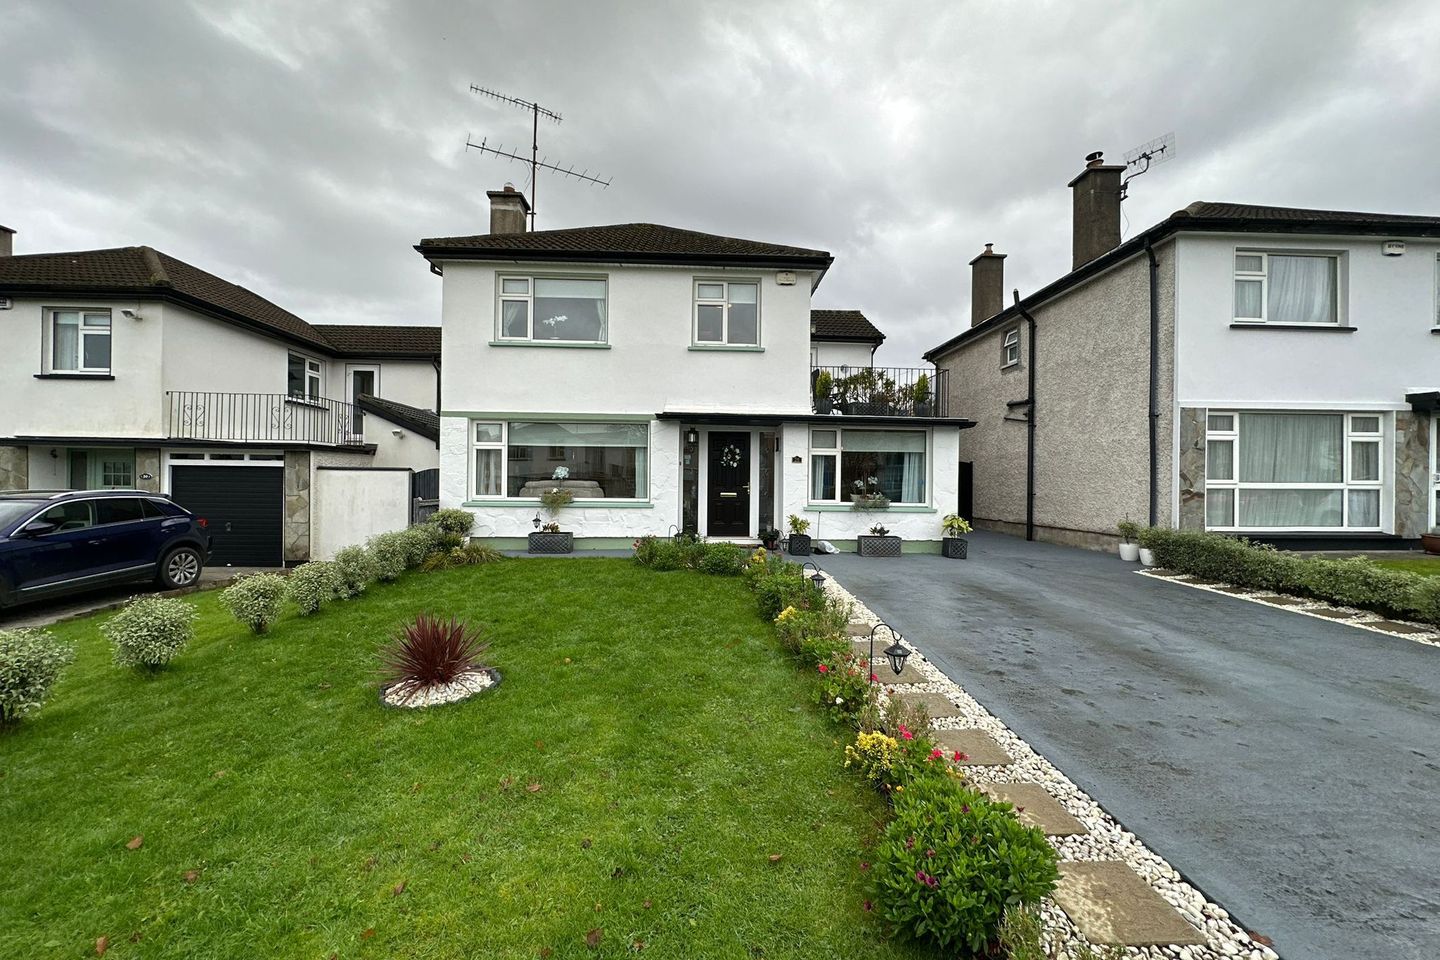 28 Melrose Avenue, Stameen, Drogheda, Co. Louth, A92H30F